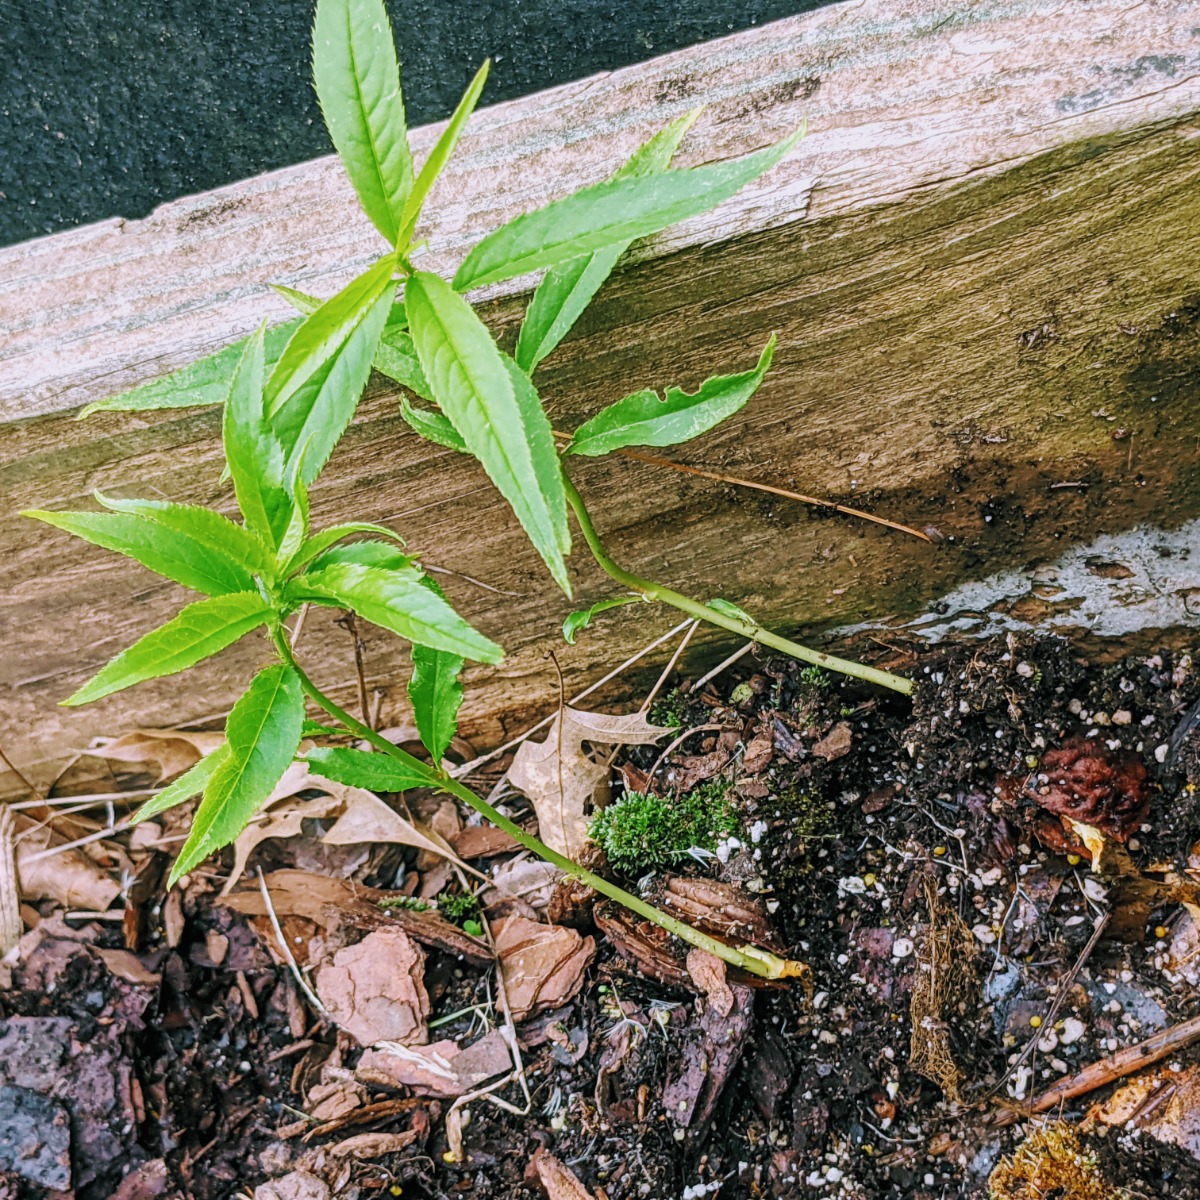 Peach Pit Growing in a Raised Bed with Wooden Sides